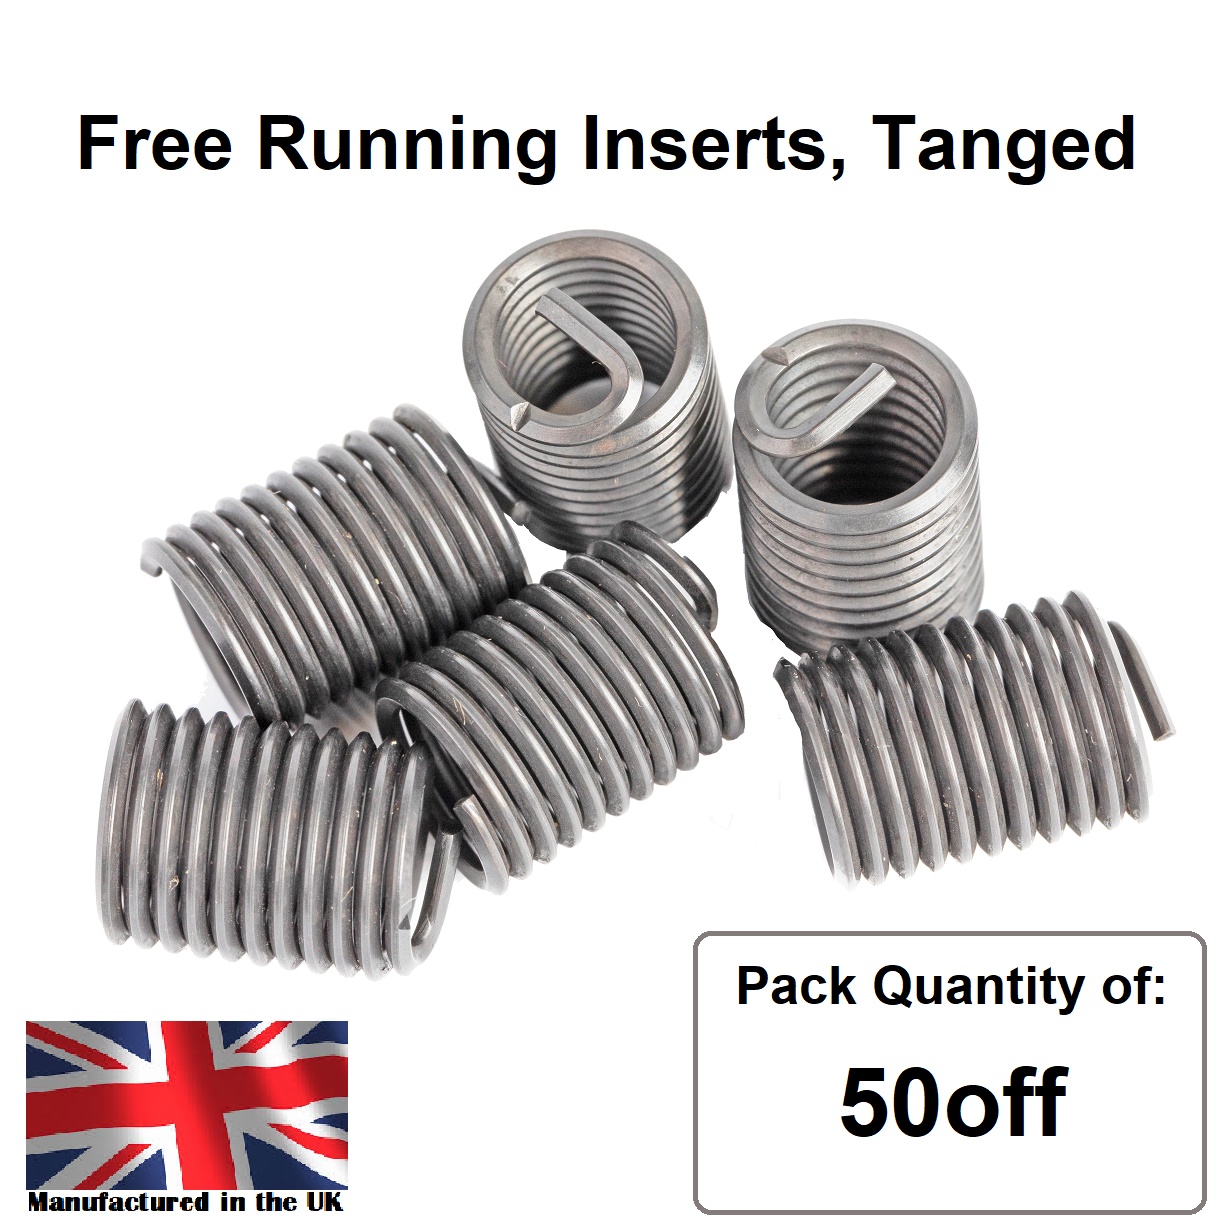 M6 x 1.0 x 1.5D Metric Coarse, Free Running, Tanged, Wire Thread Repair Insert, 304/A2 Stainless (Pack 50)